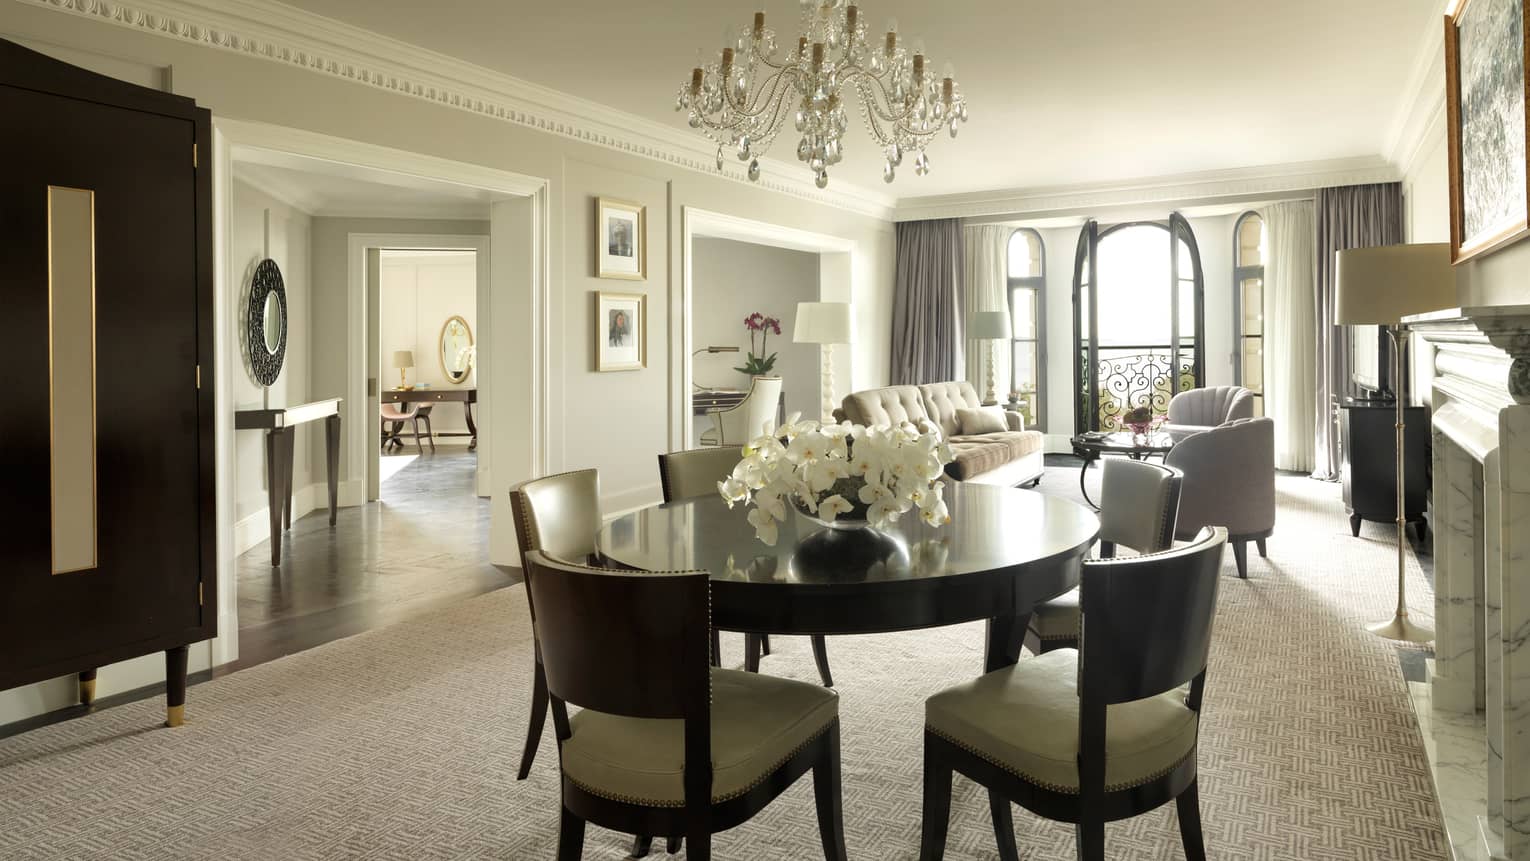 One-bedroom Suite round dining room table for 6, small crystal chandelier, living room, French doors to balcony in background